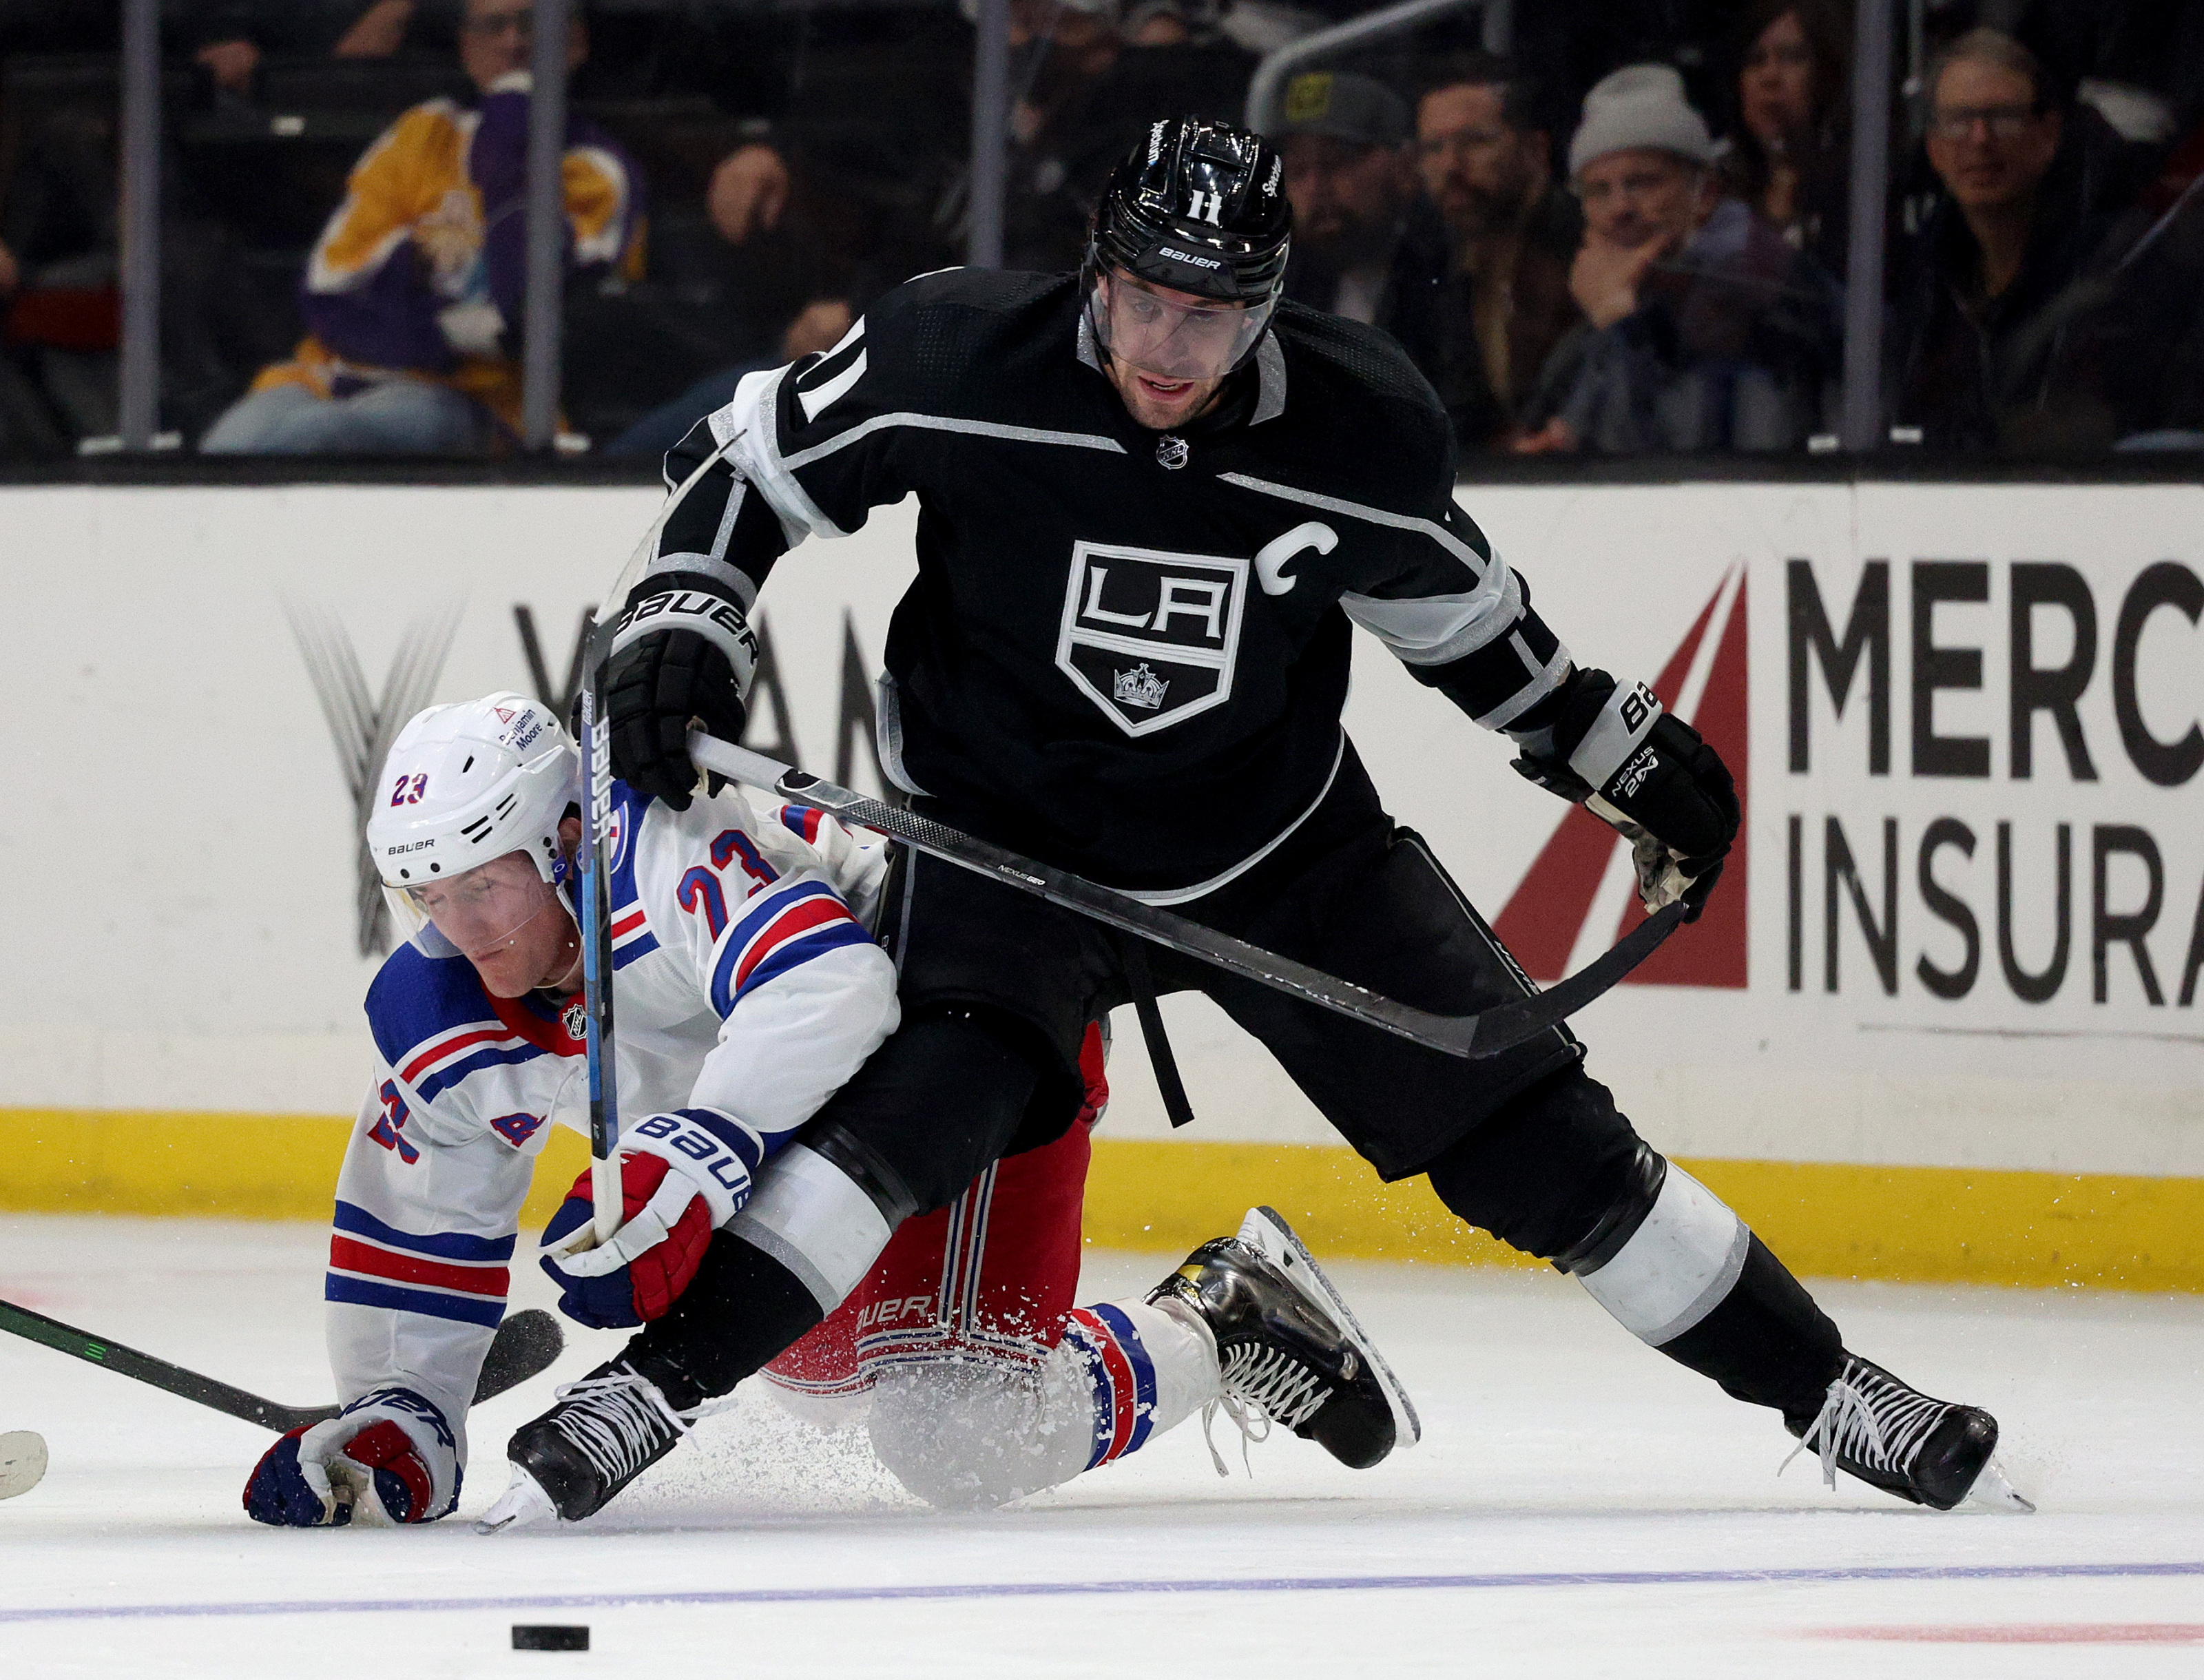 New York Rangers look to avenge 3-1 loss in a rematch with the Kings